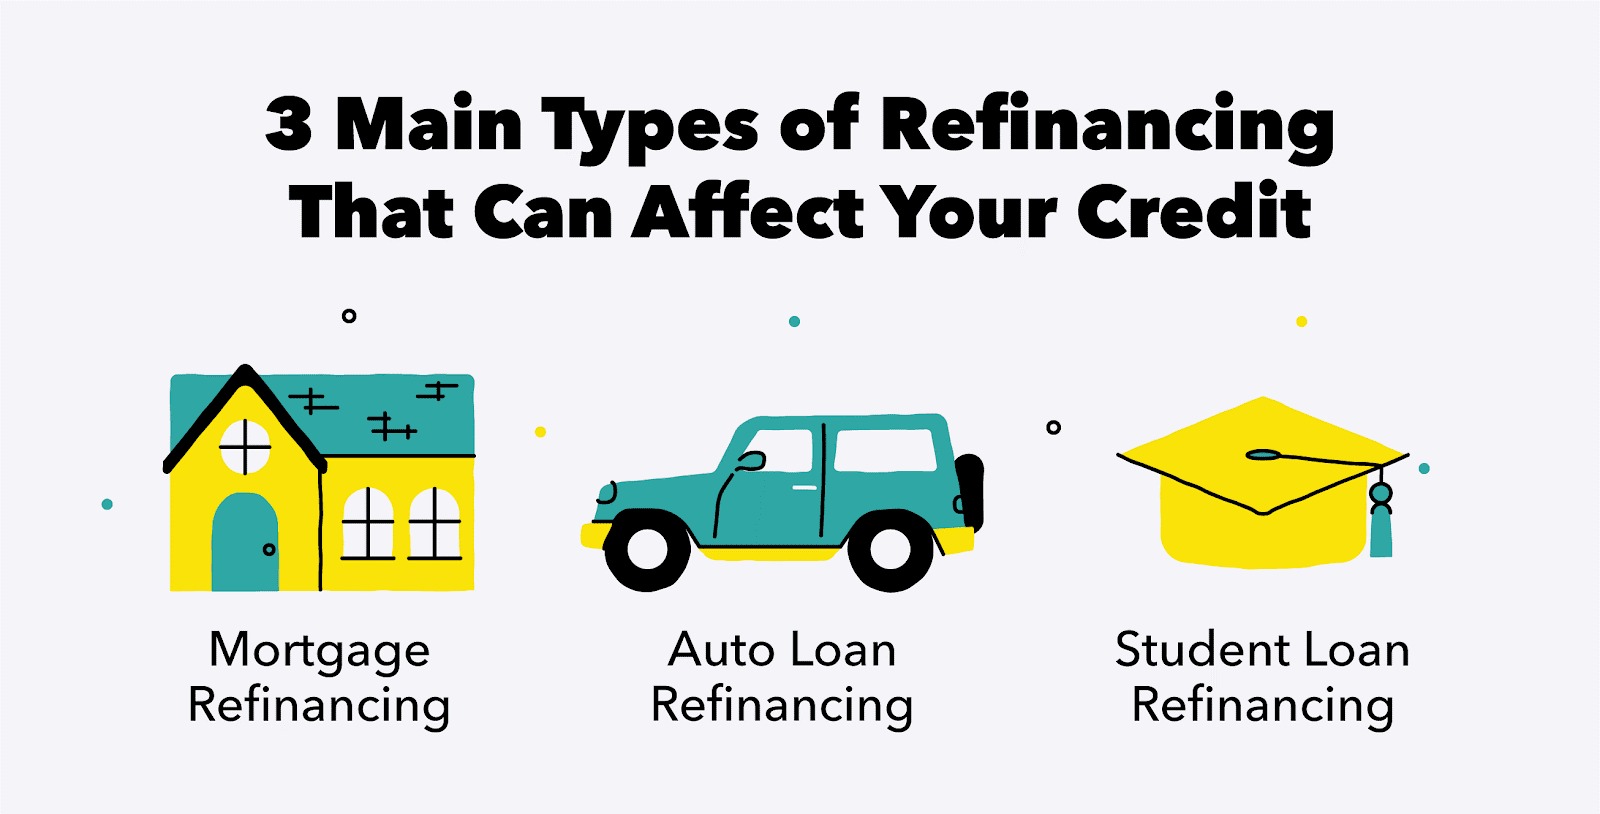 How Much Does Your Credit Score Drop When You Refinance Your Car